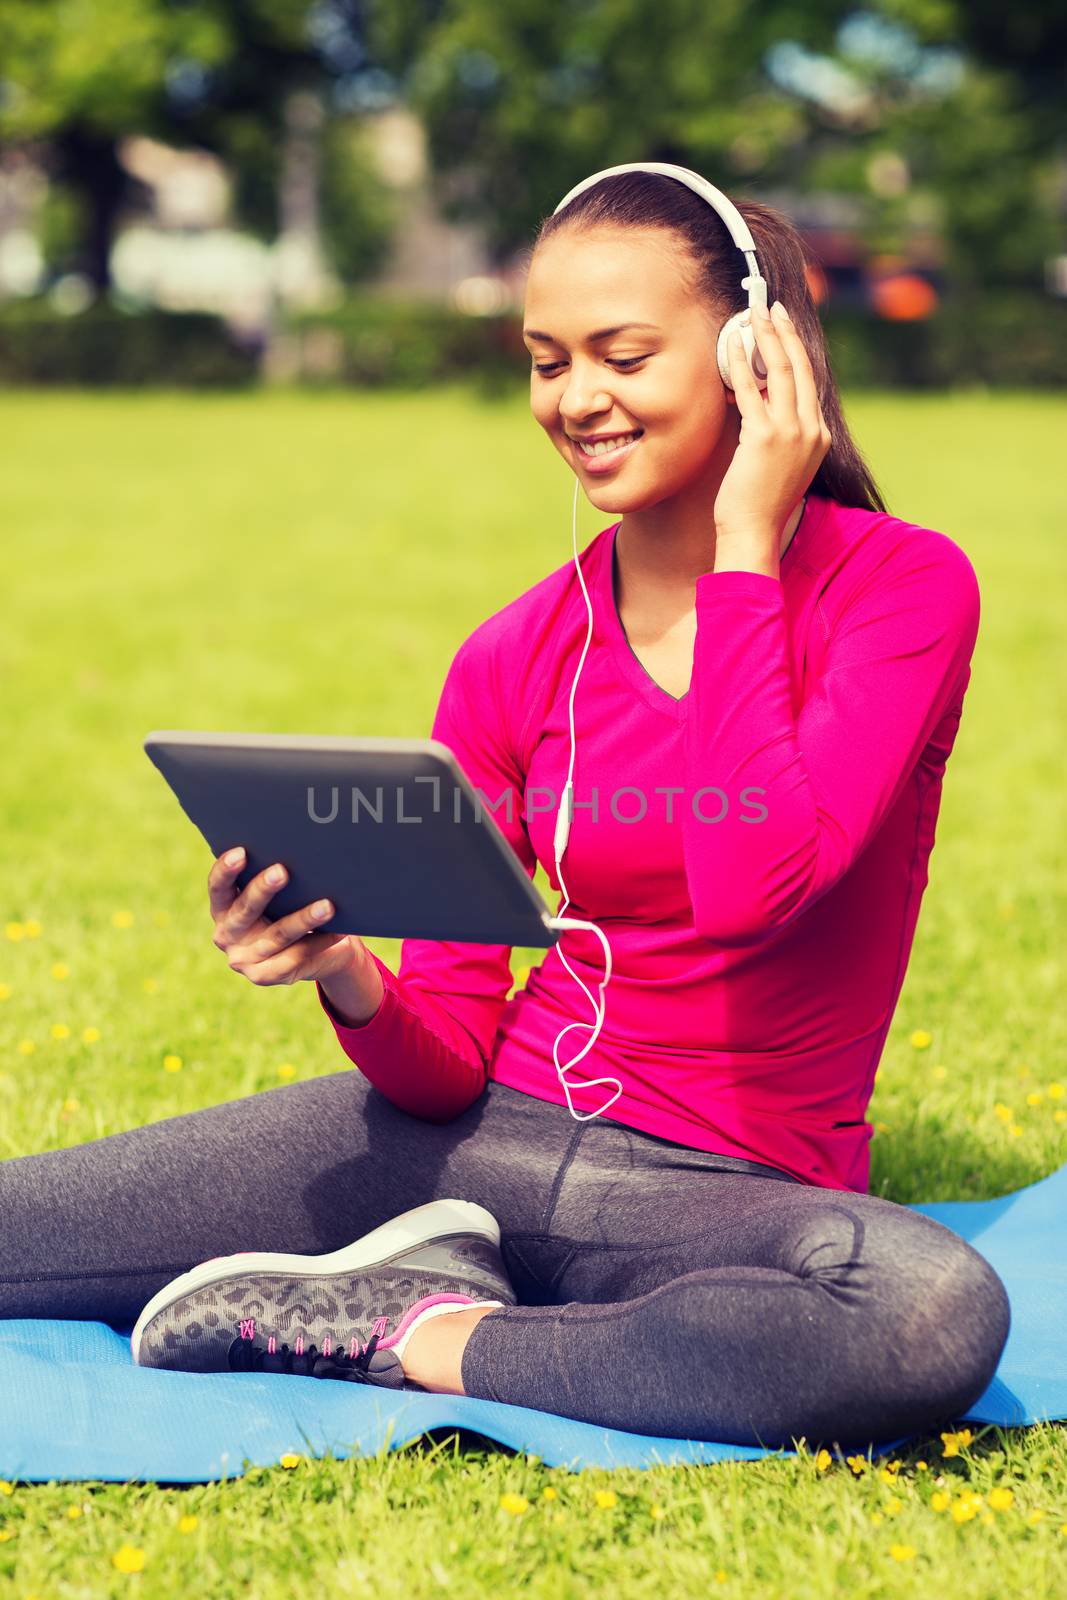 fitness, park, technology and sport concept - smiling african american woman with tablet pc computer and headphones on mat outdoors